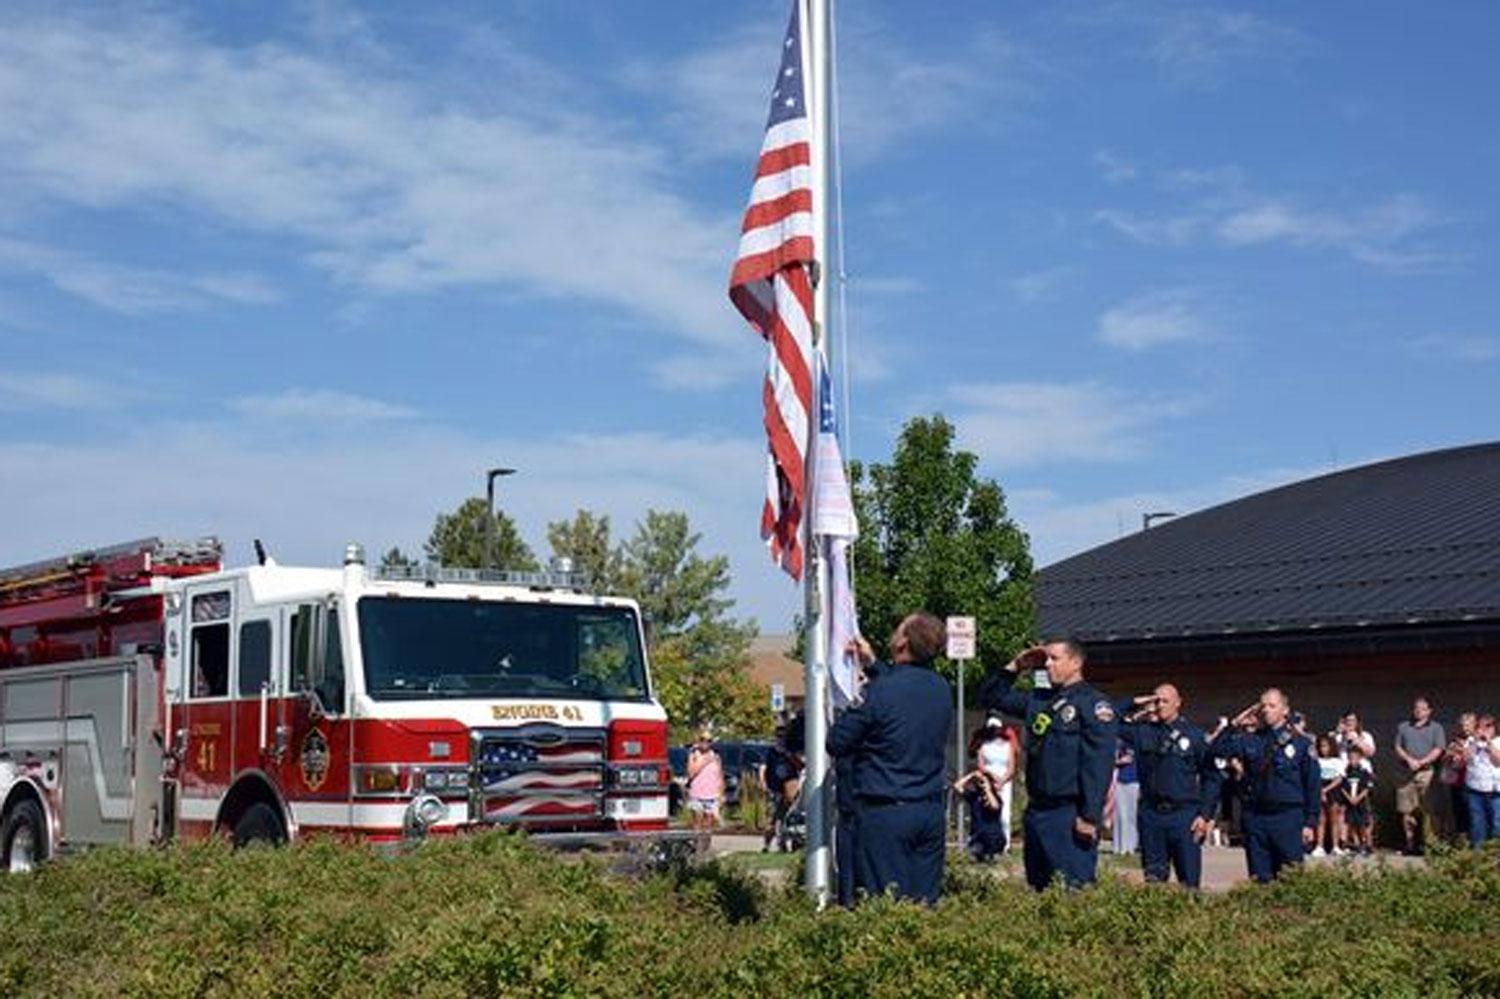 Firefighters raising the flag at the first annual 9/11 Day Flag of Honor Across America Memorial